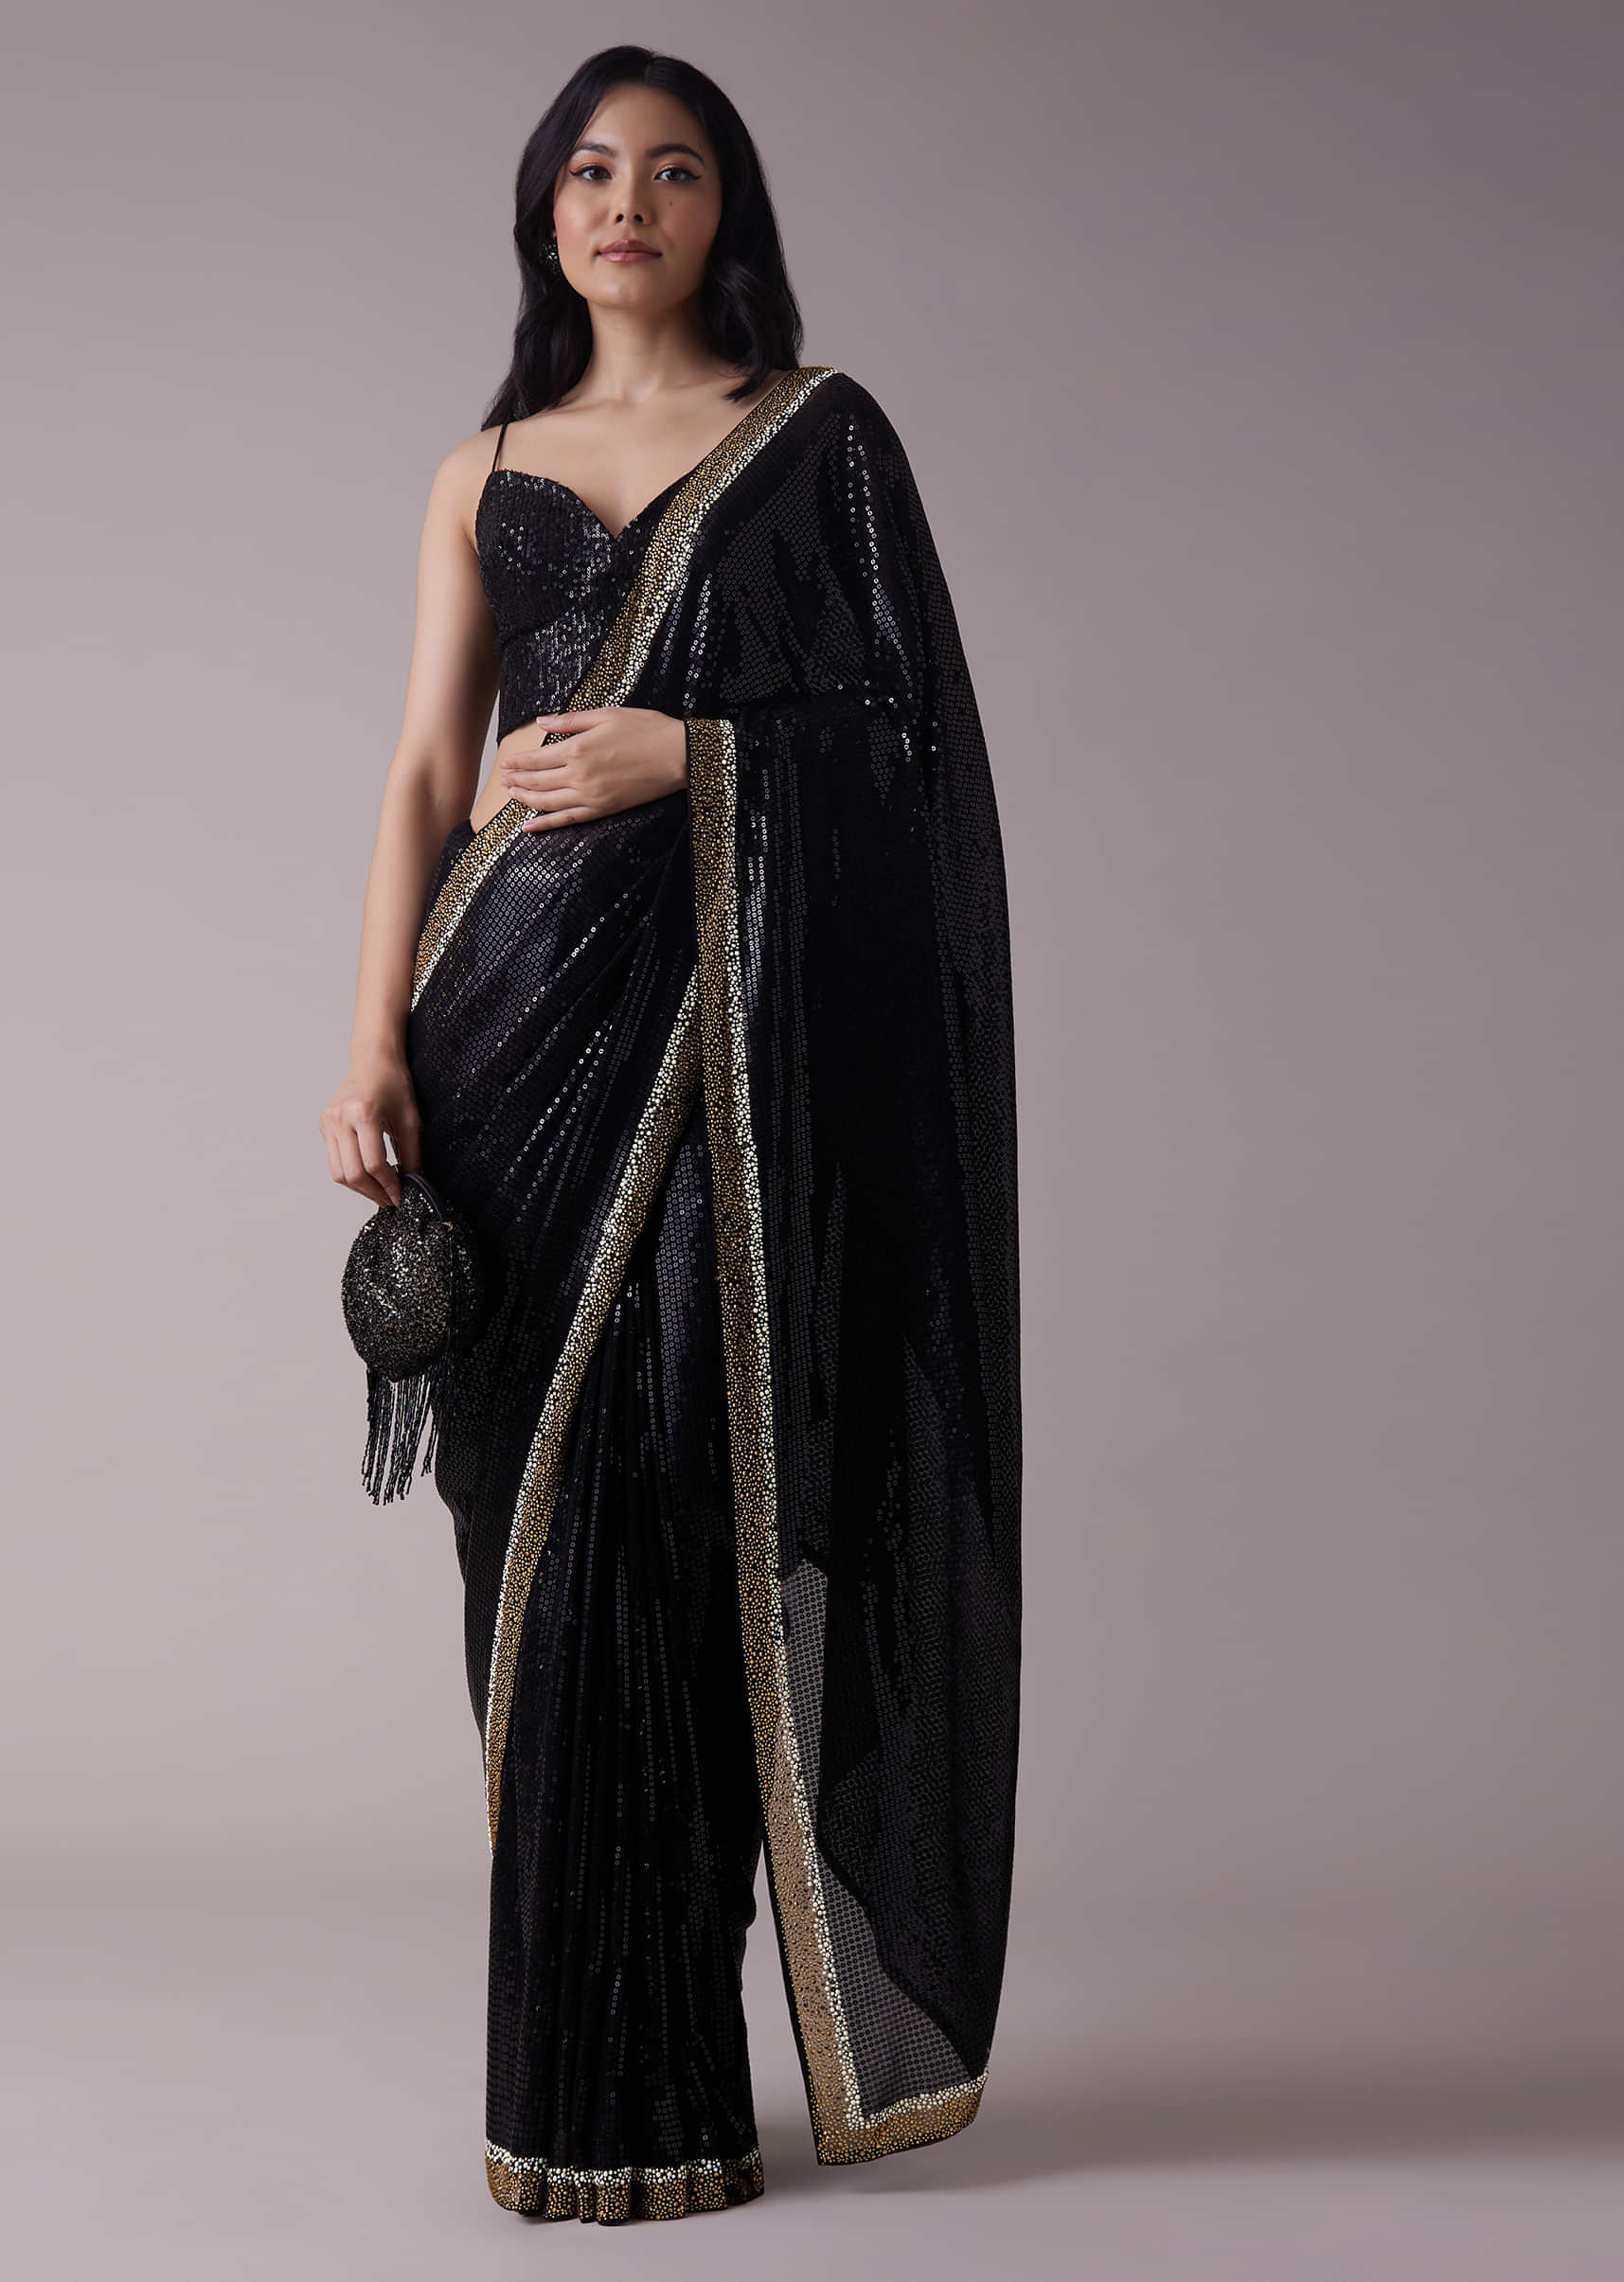 Black Sequins Saree With An Embellished Border